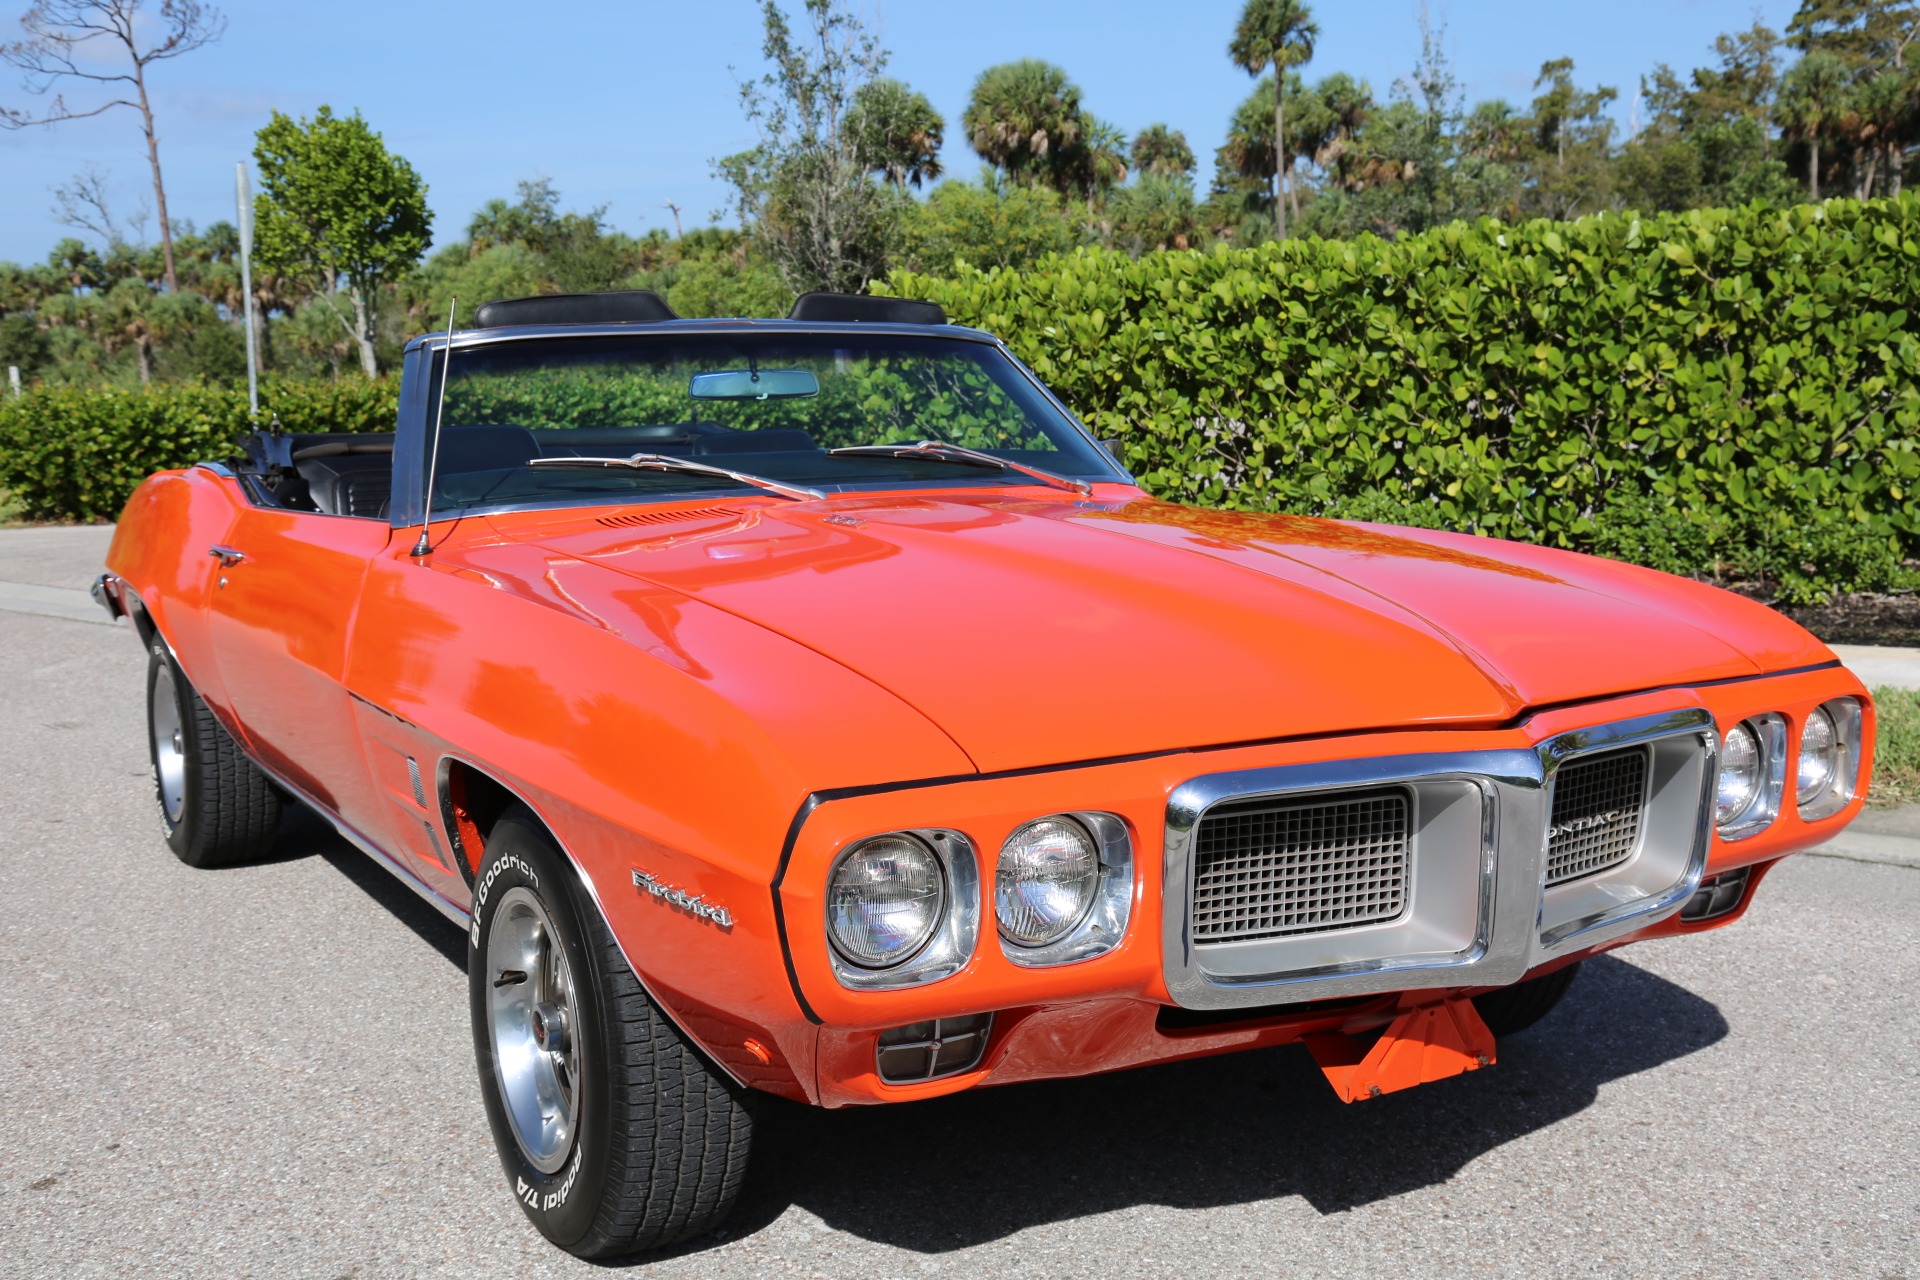 Used 1969 Pontiac Firebird Convertible for sale Sold at Muscle Cars for Sale Inc. in Fort Myers FL 33912 6